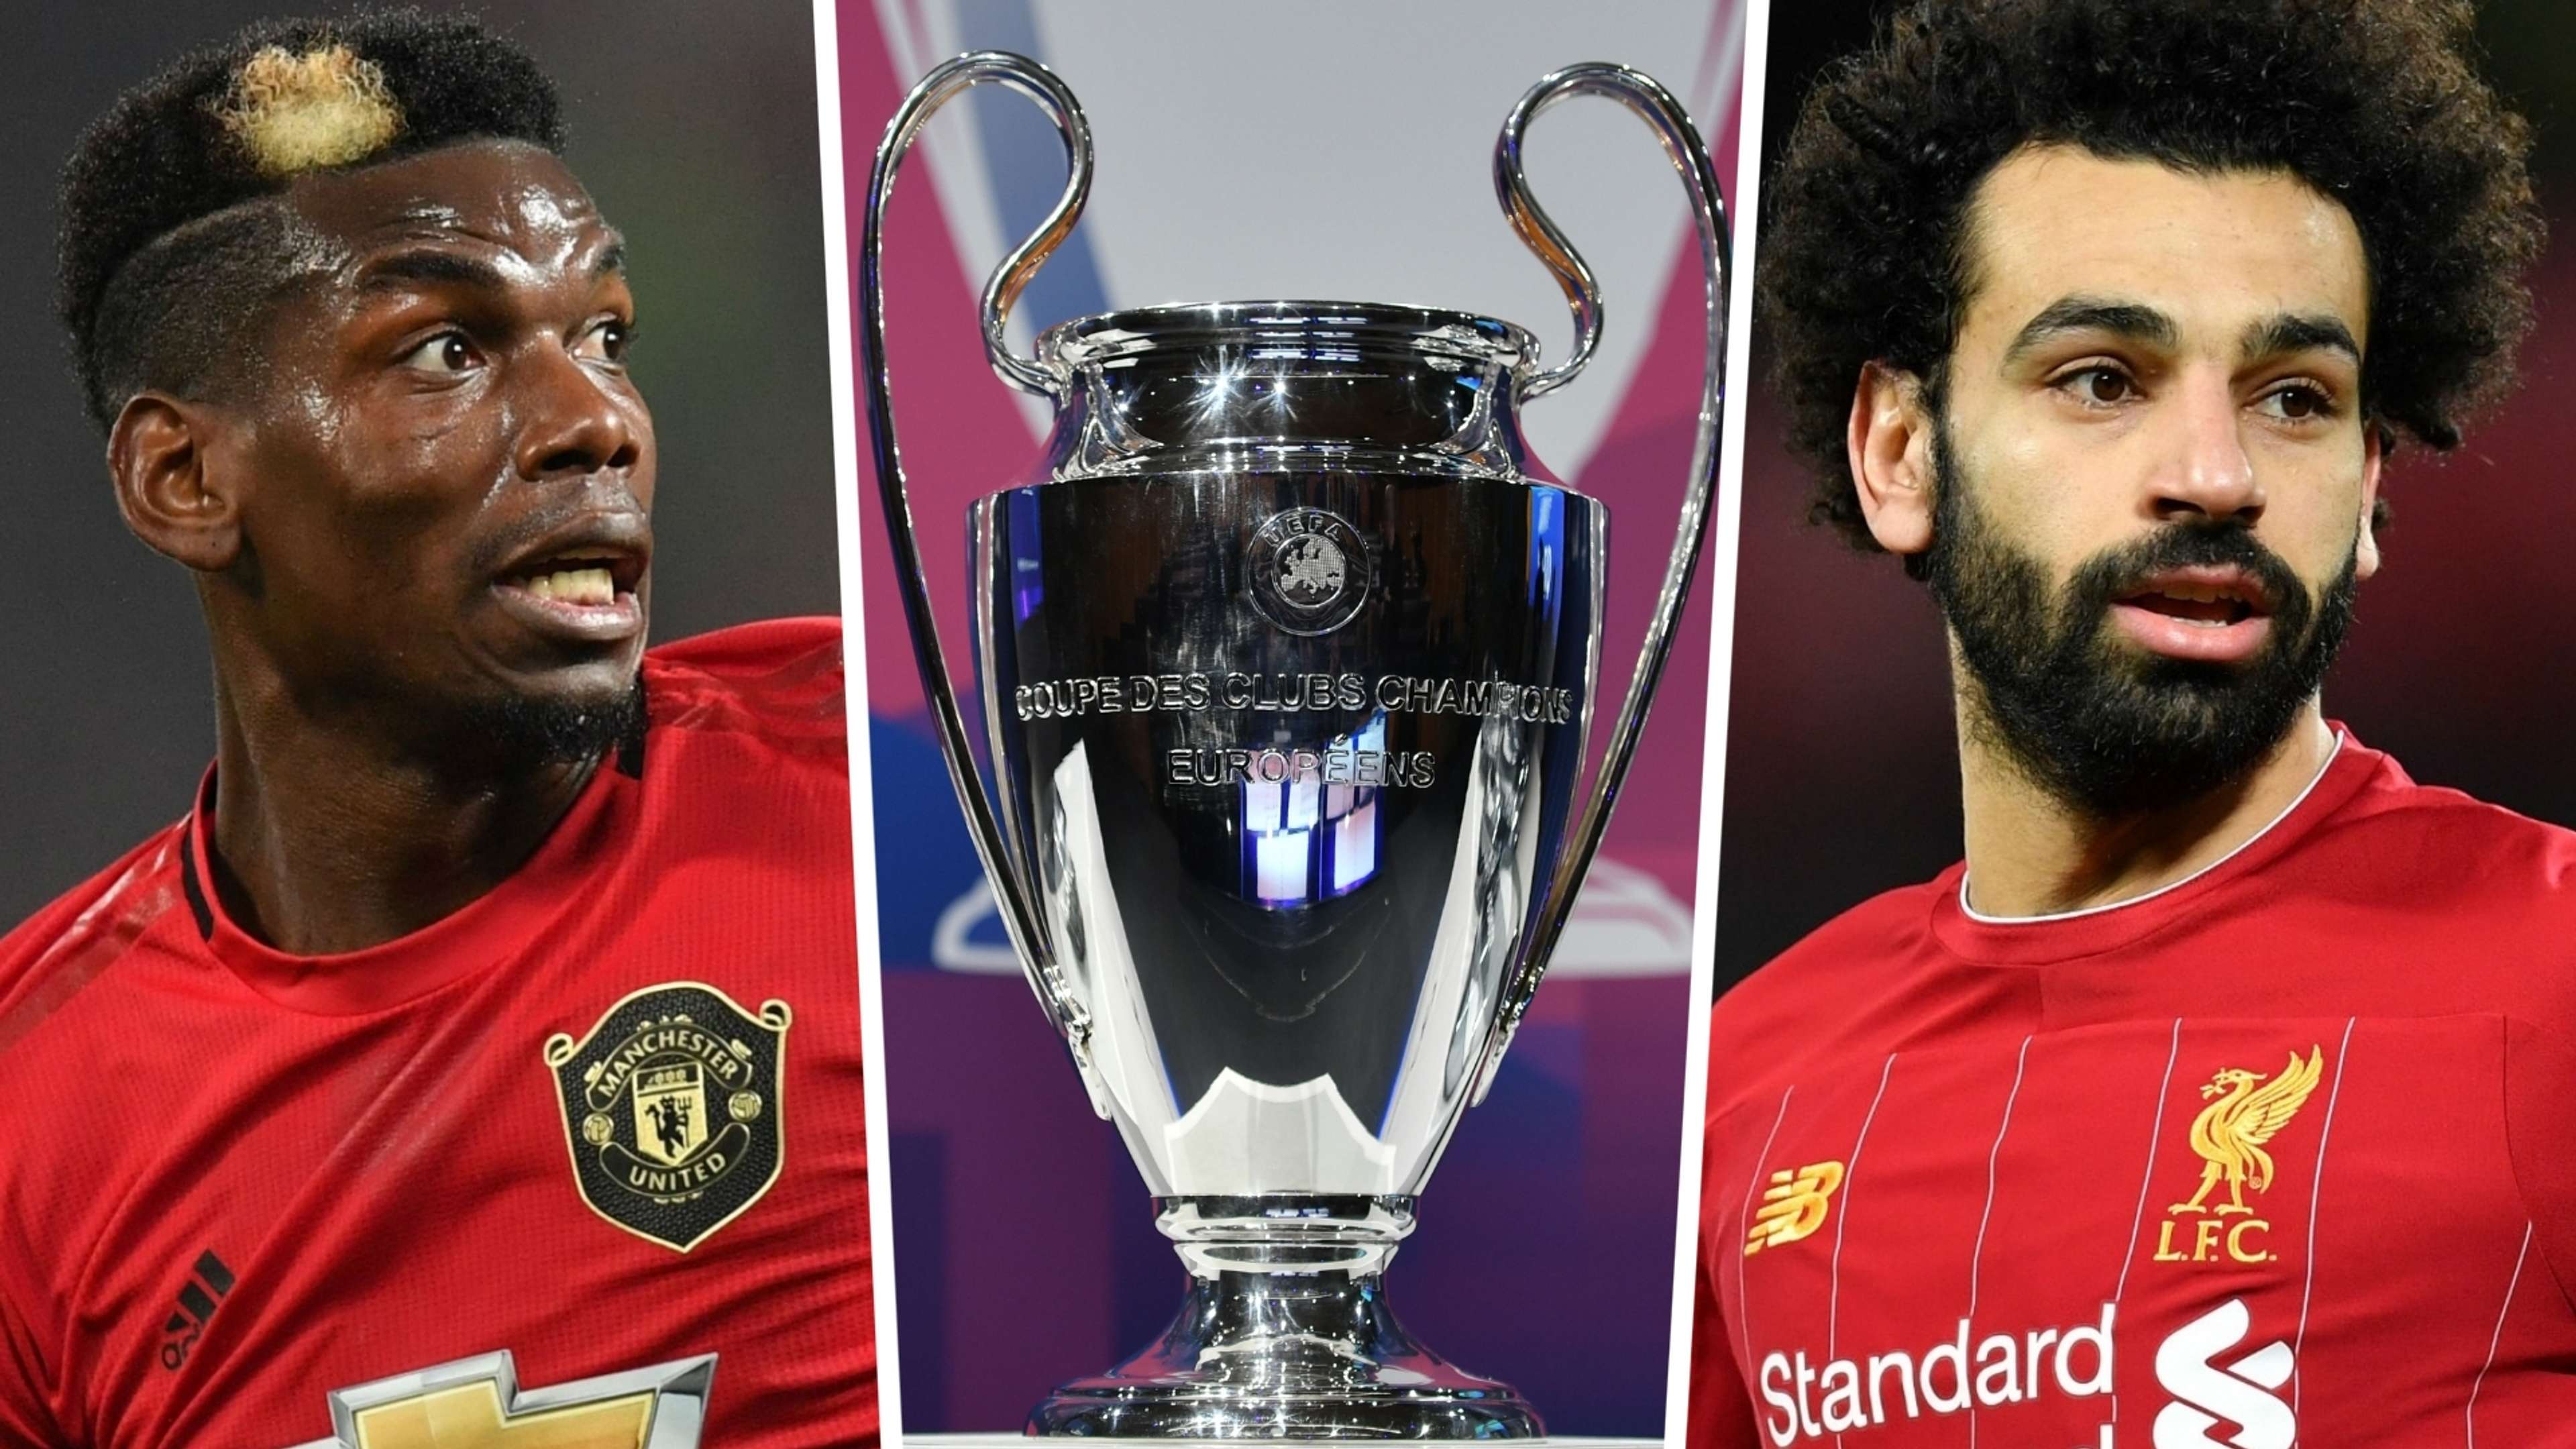 Paul Pogba Mohamed Salah Champions League Manchester United Liverpool 2019-20